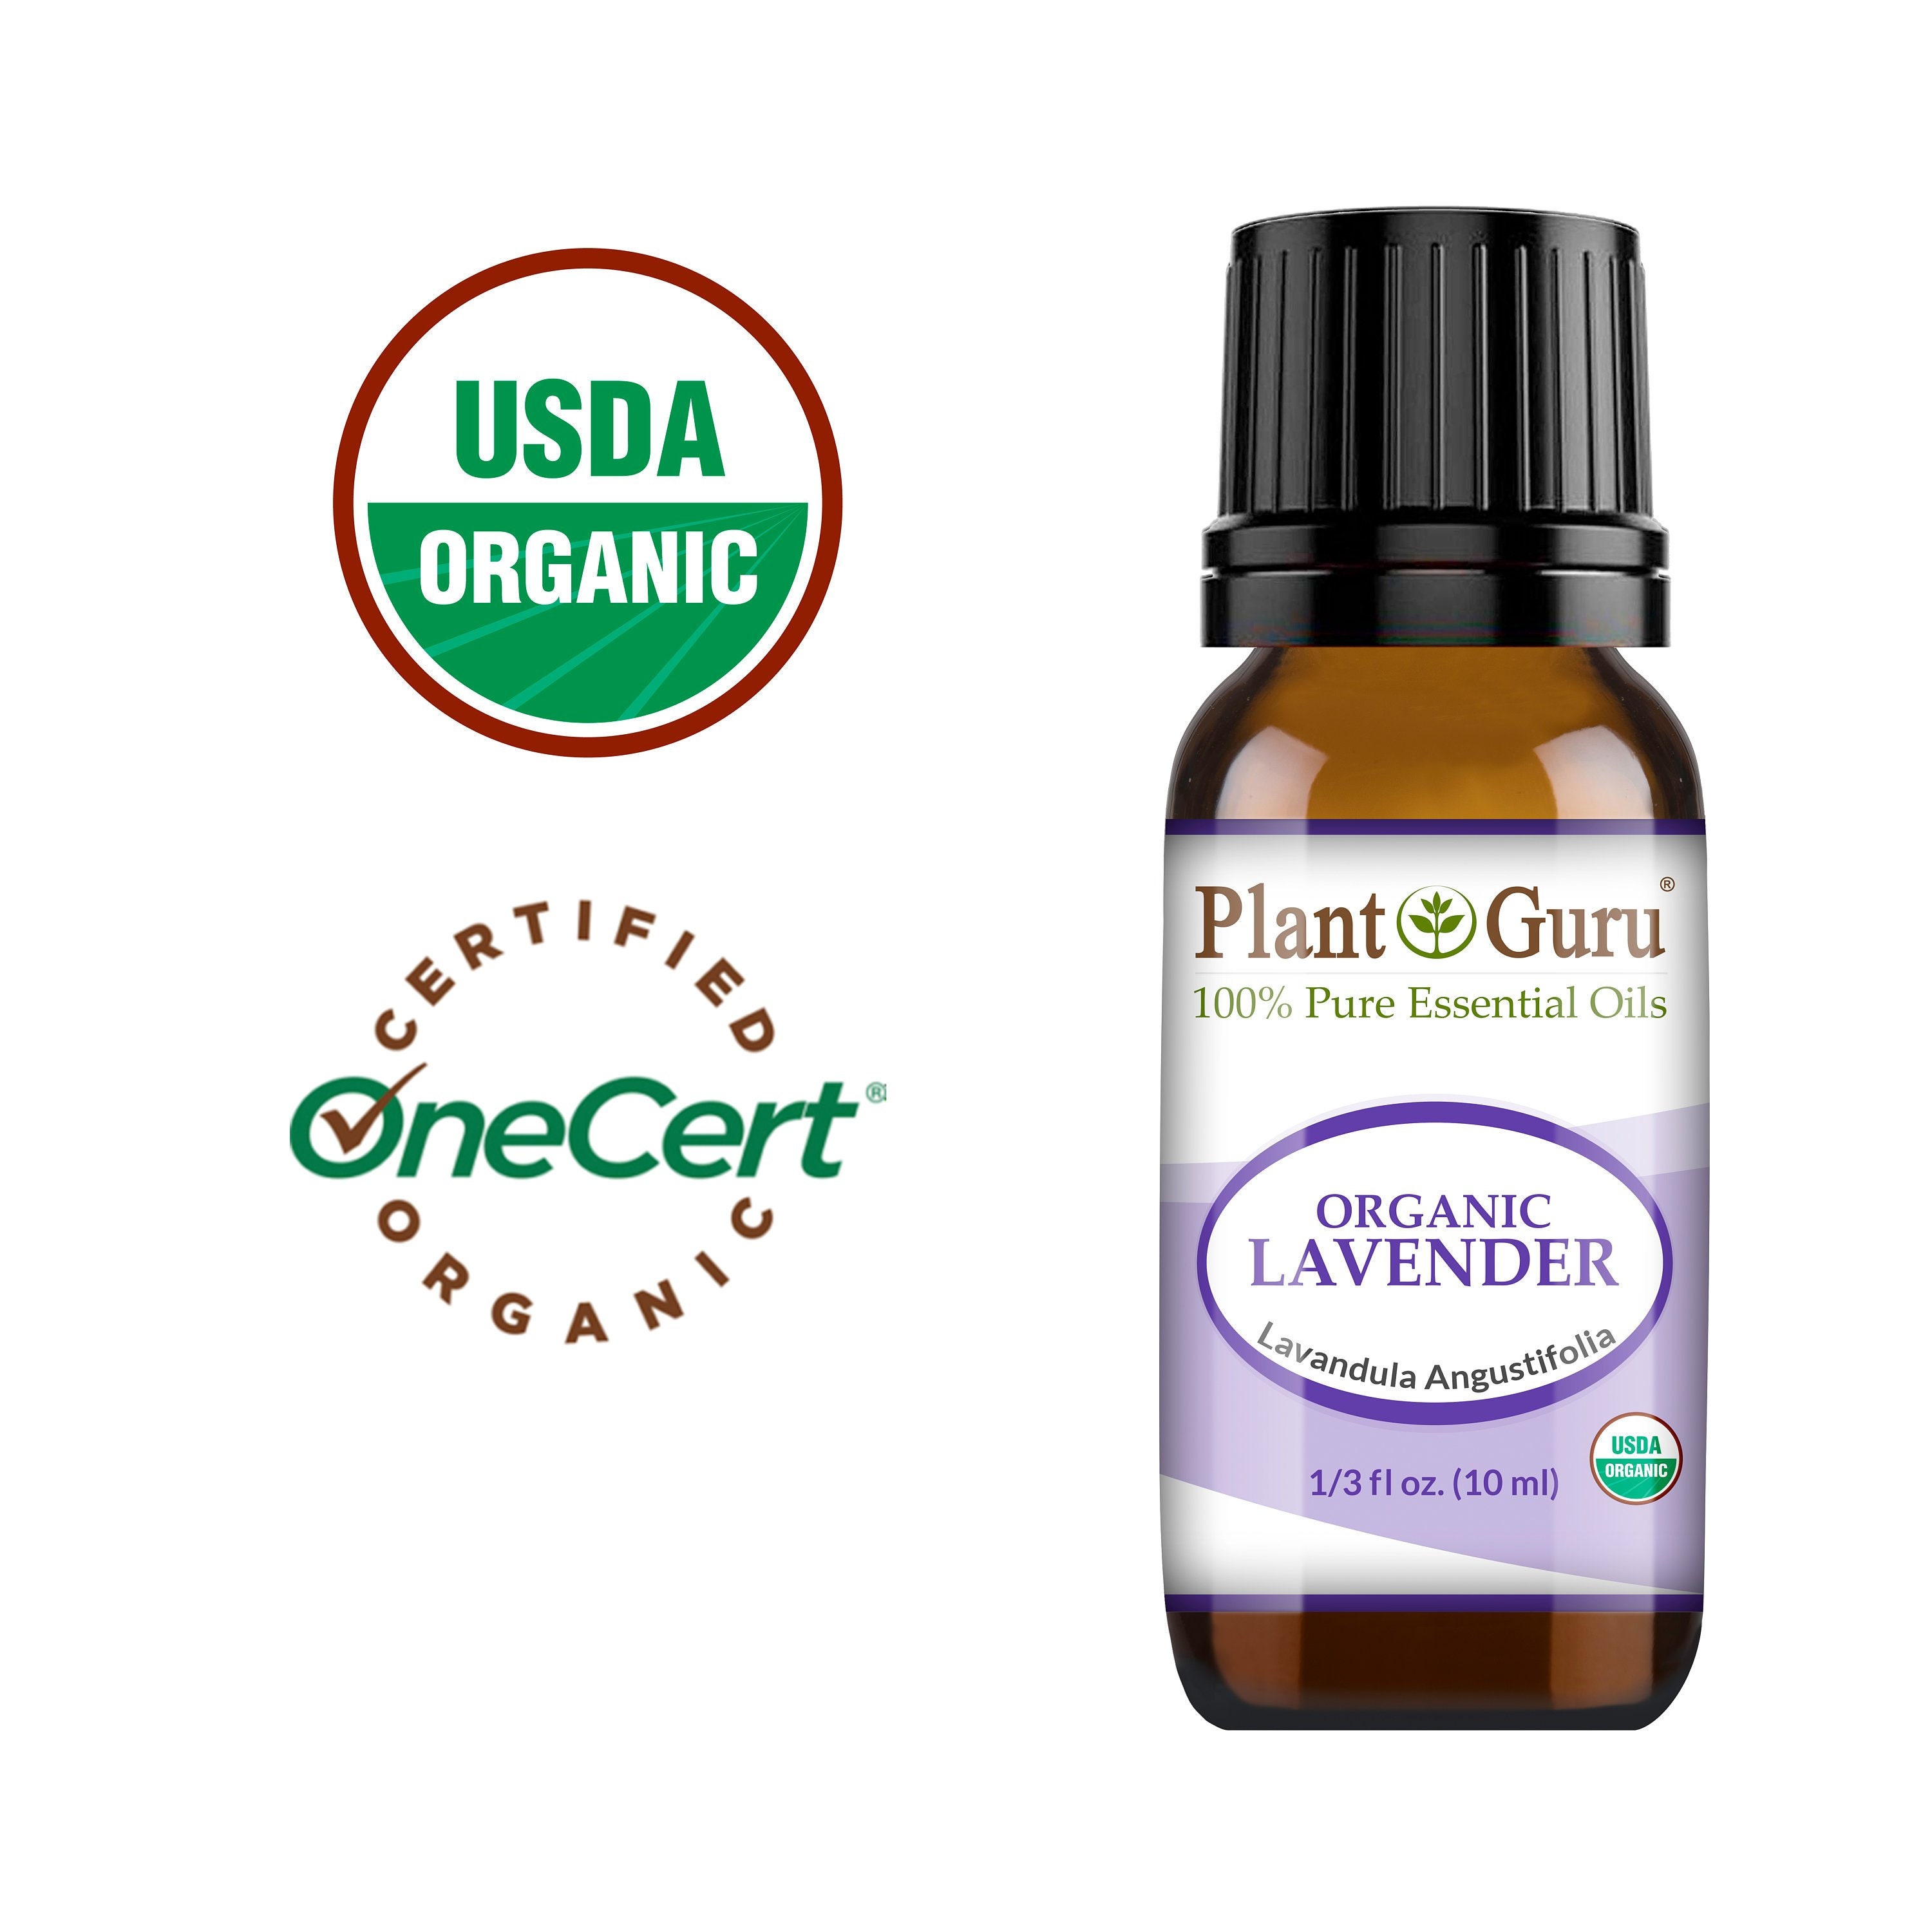 Plant Therapy Patchouli Essential Oil. 100% Pure, Undiluted, Therapeutic Grade.